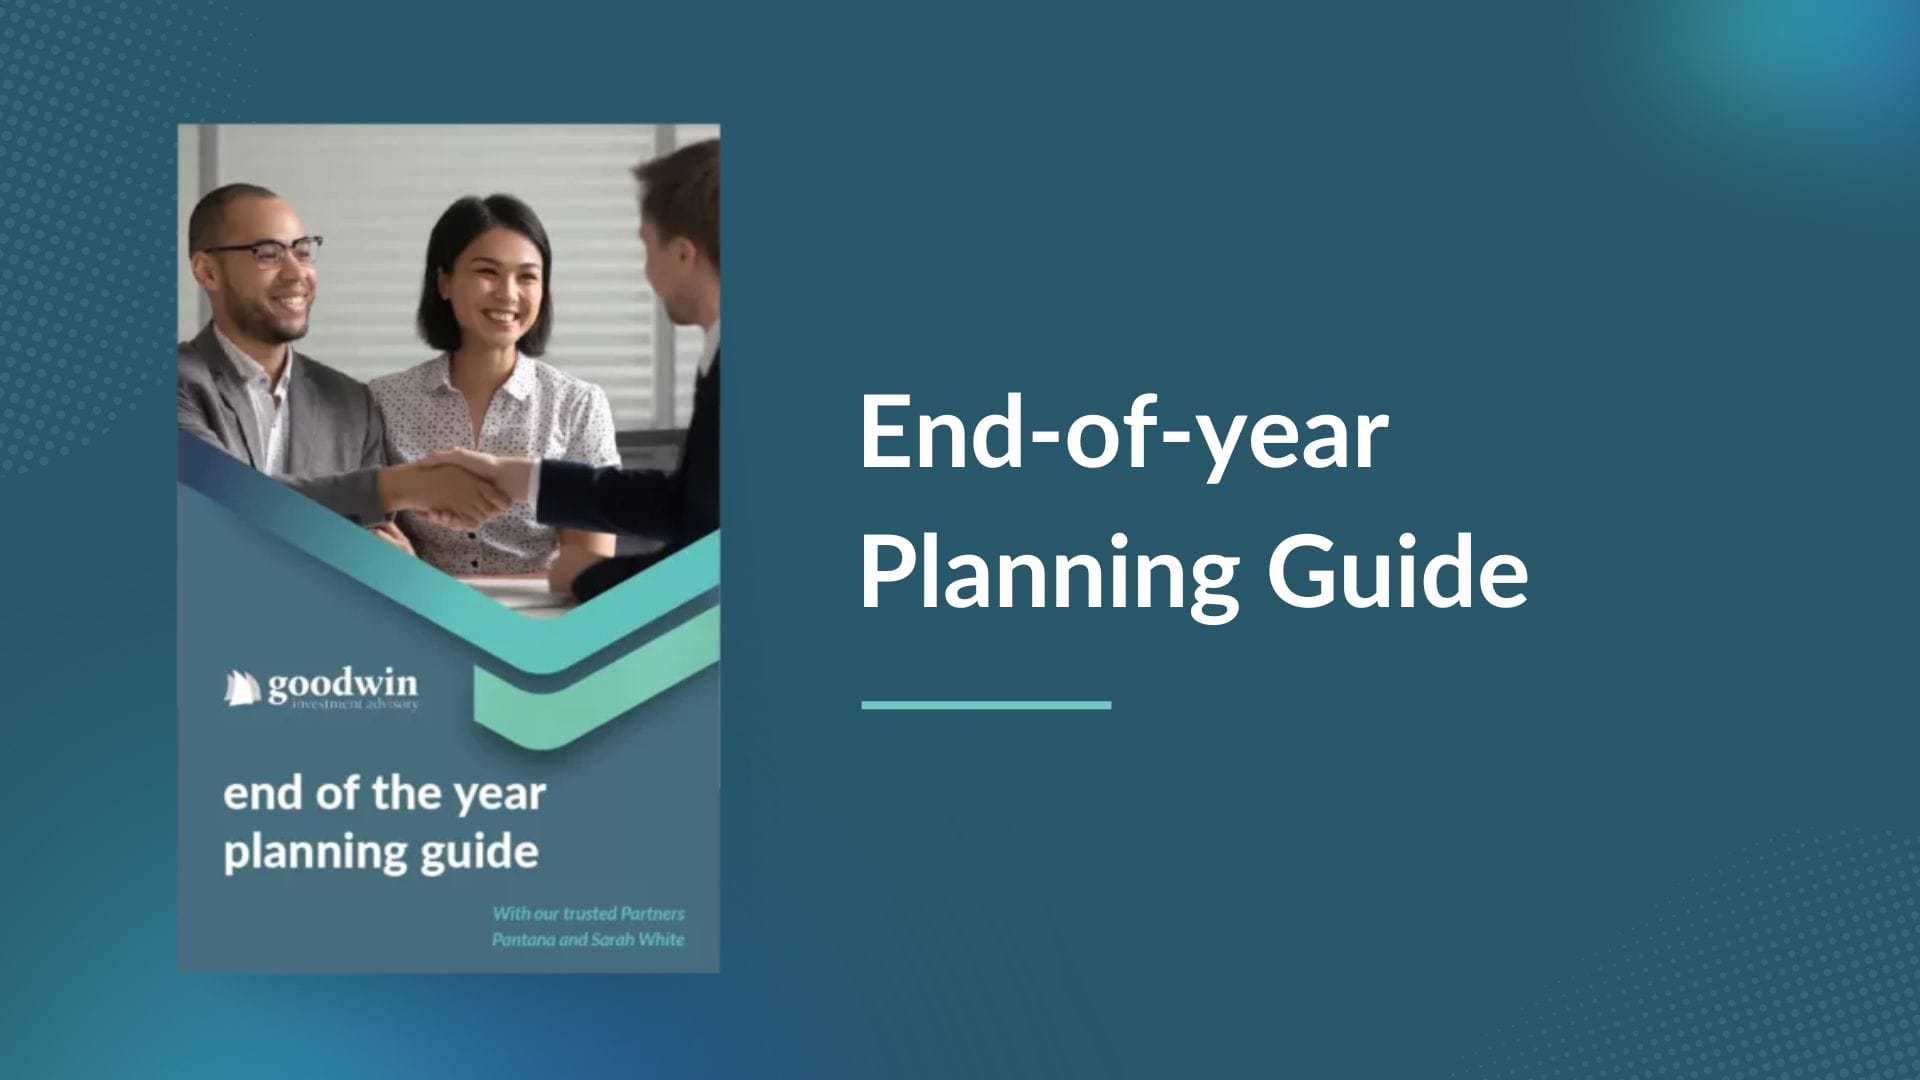 End-of-year Planning Guide